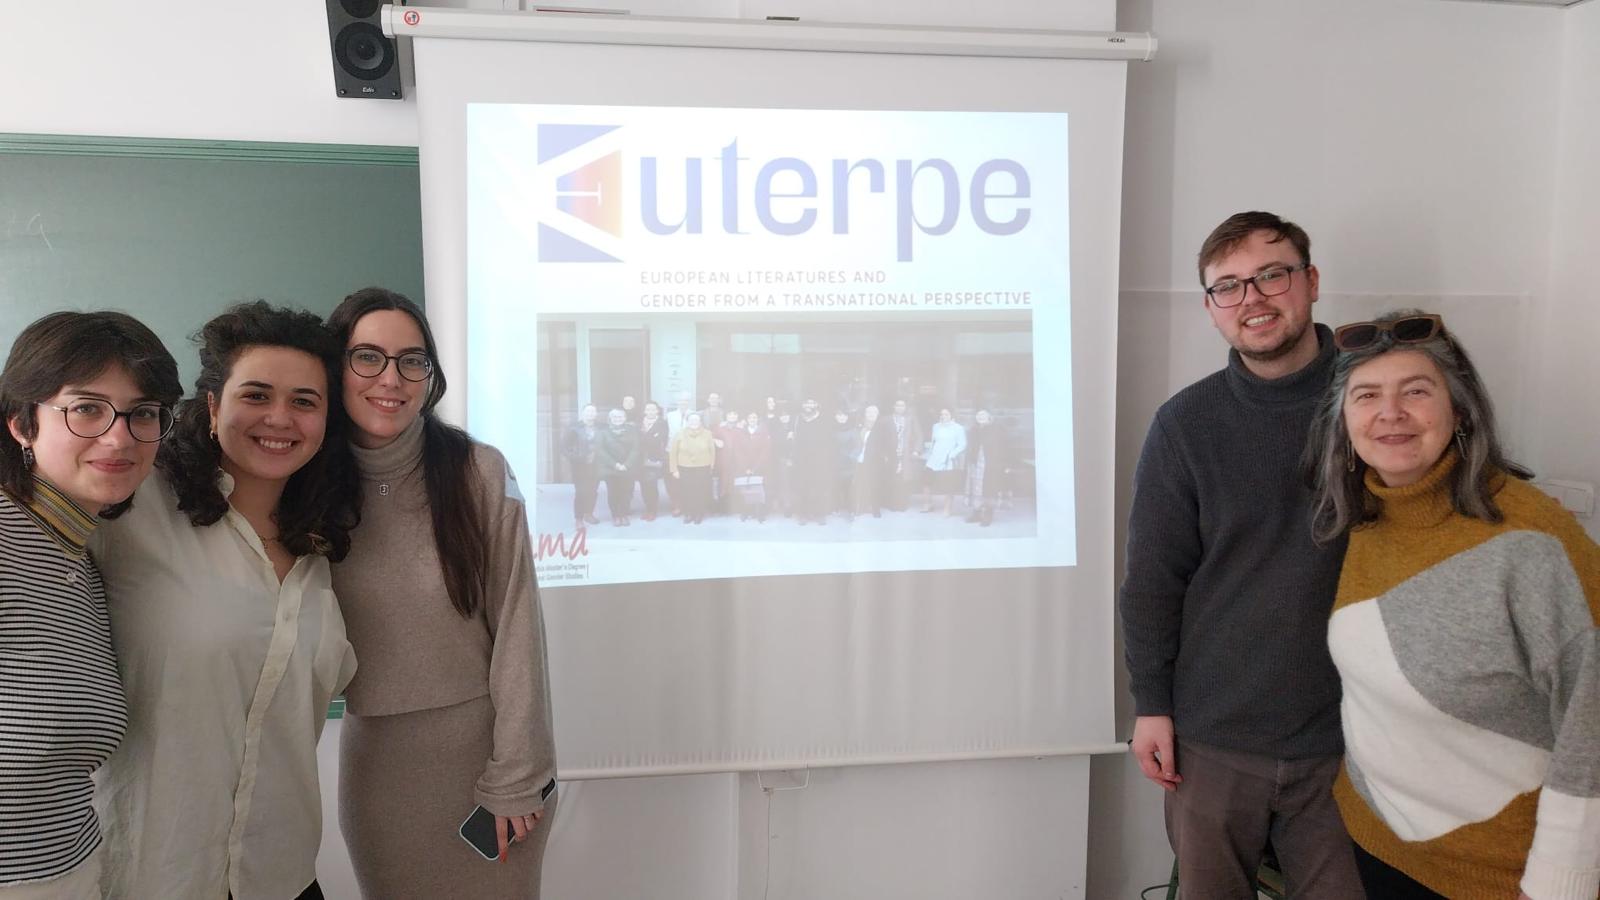 Representatives of the EUTERPE and DIGISCREENS projects